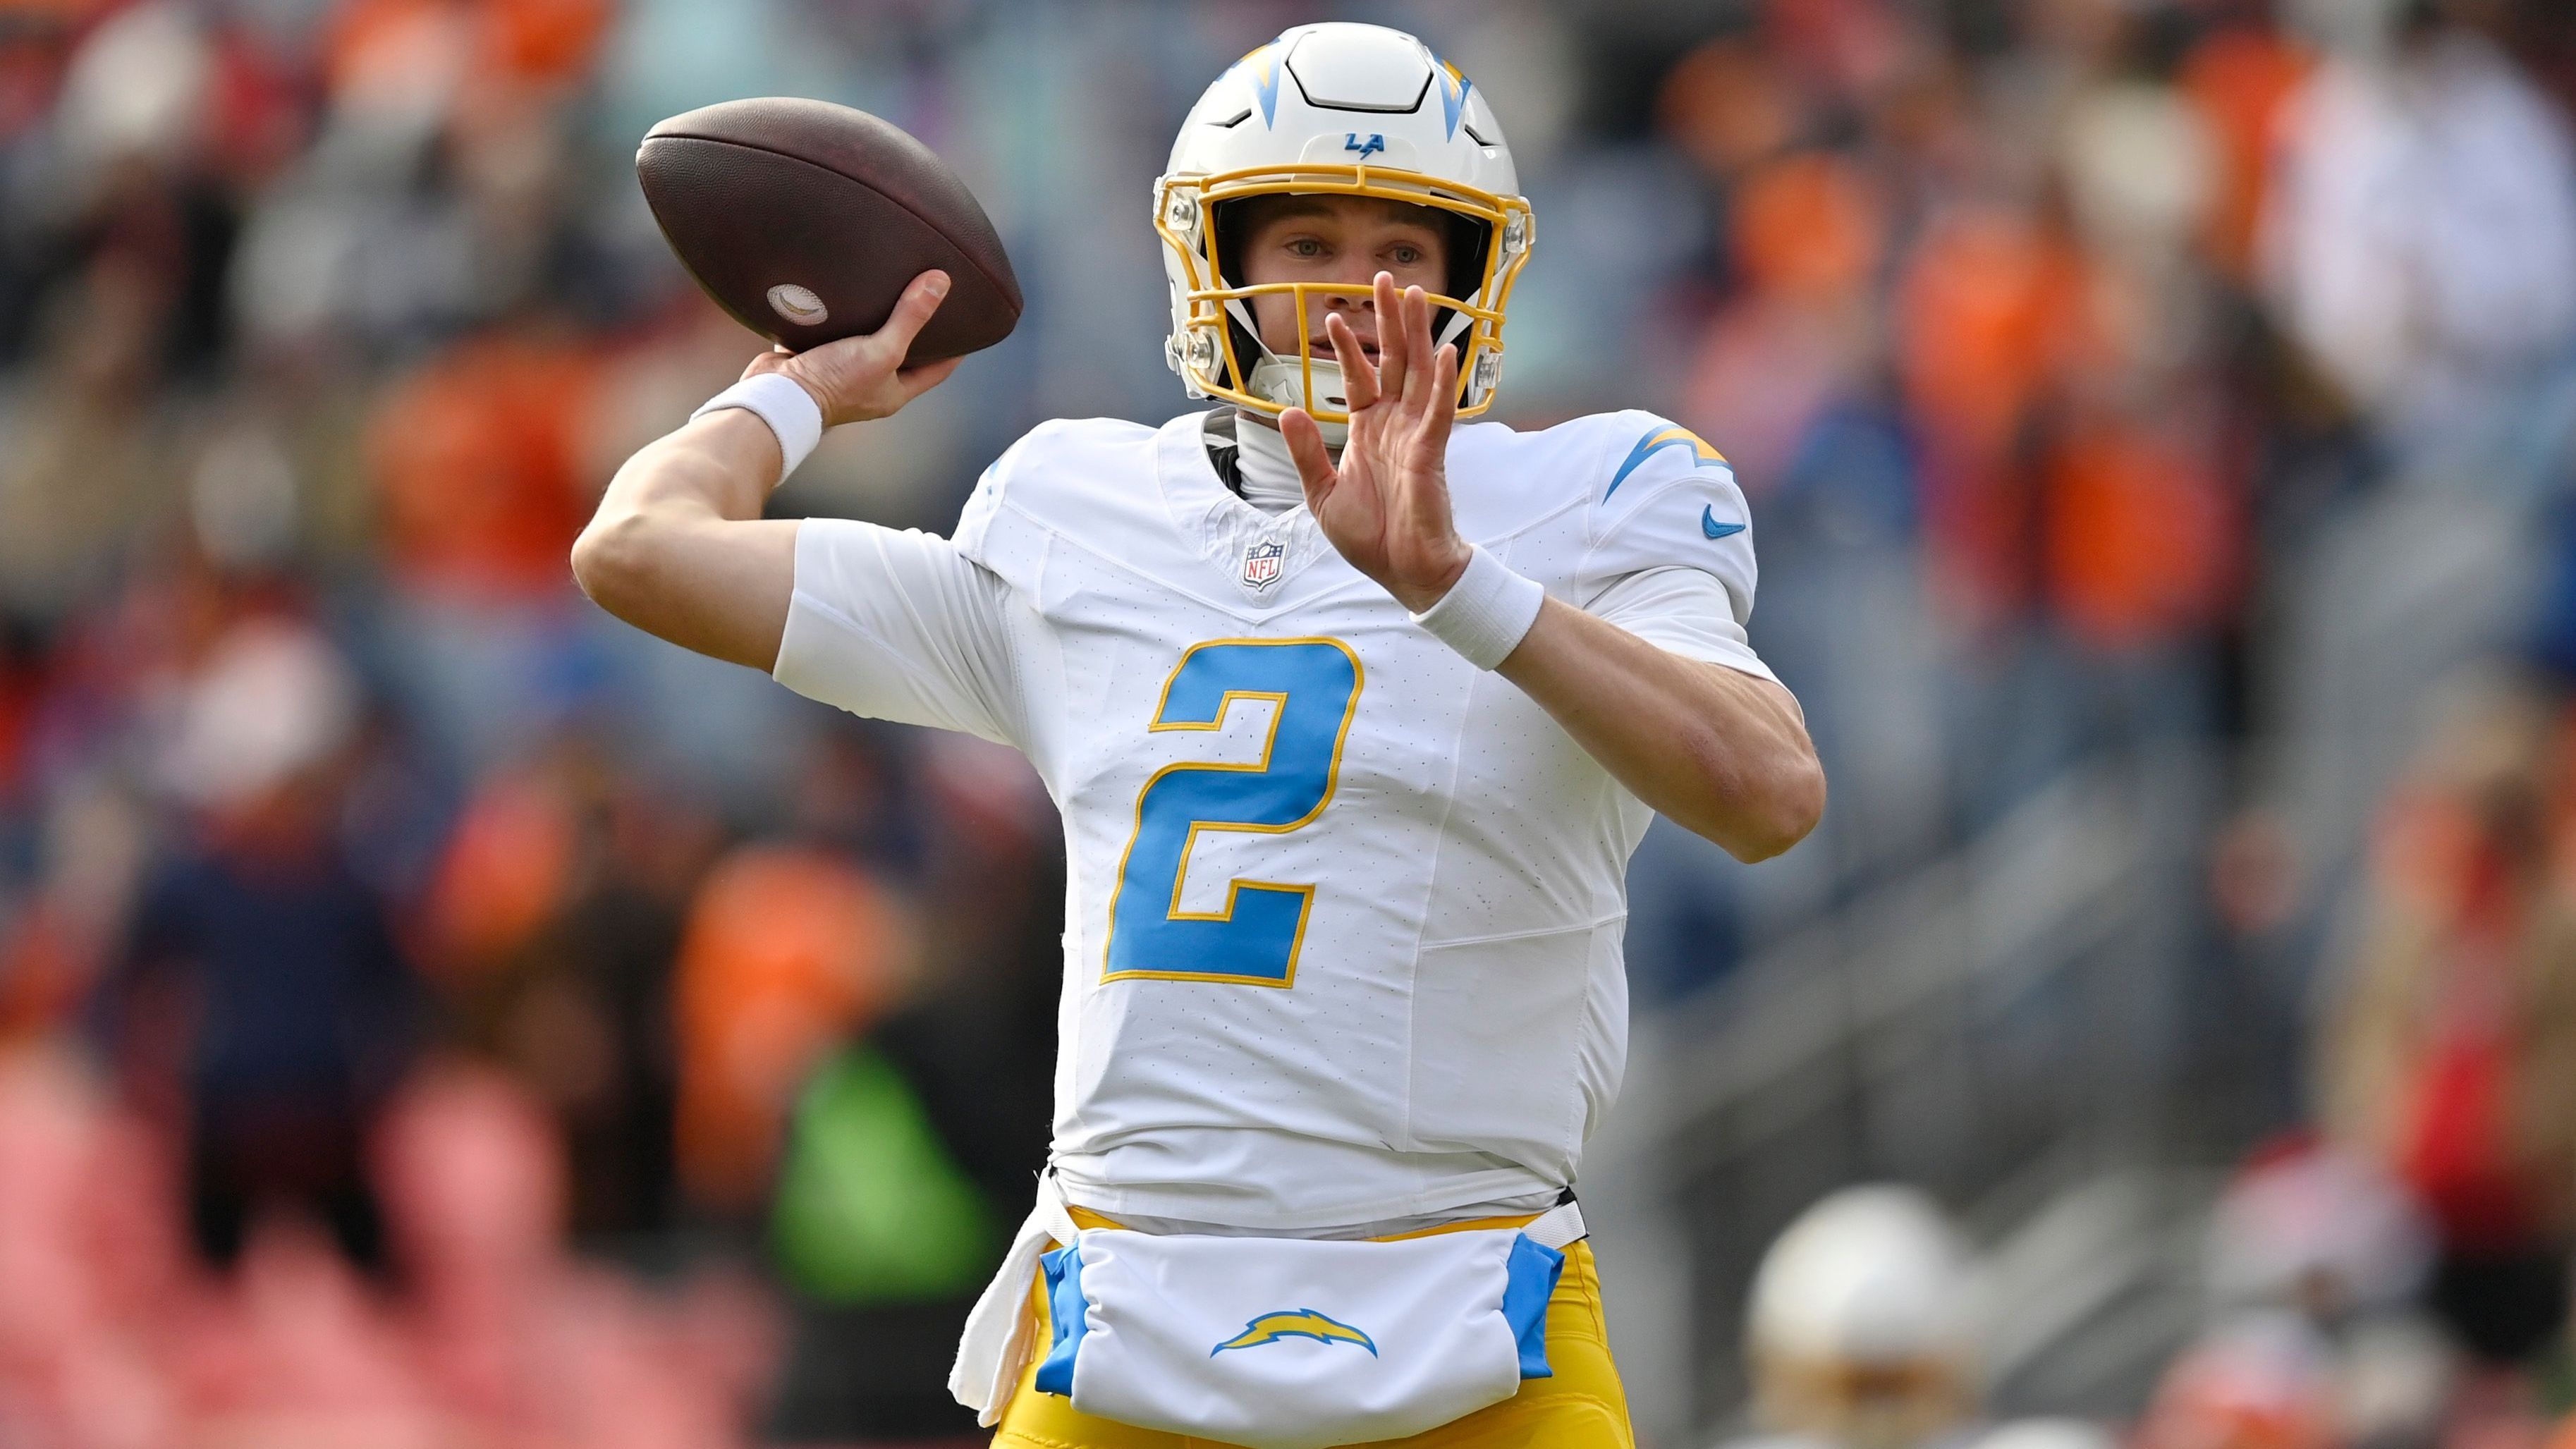 <strong>Los Angeles Chargers<br></strong>Volontary Minicamp: 22. - 24. April<br>OTA Offseason Workouts: 20./21. Mai, 23. Mai, 29. - 31. Mai, 4. - 7. Juni<br>Mandatory Minicamp: 11. - 13. Juni